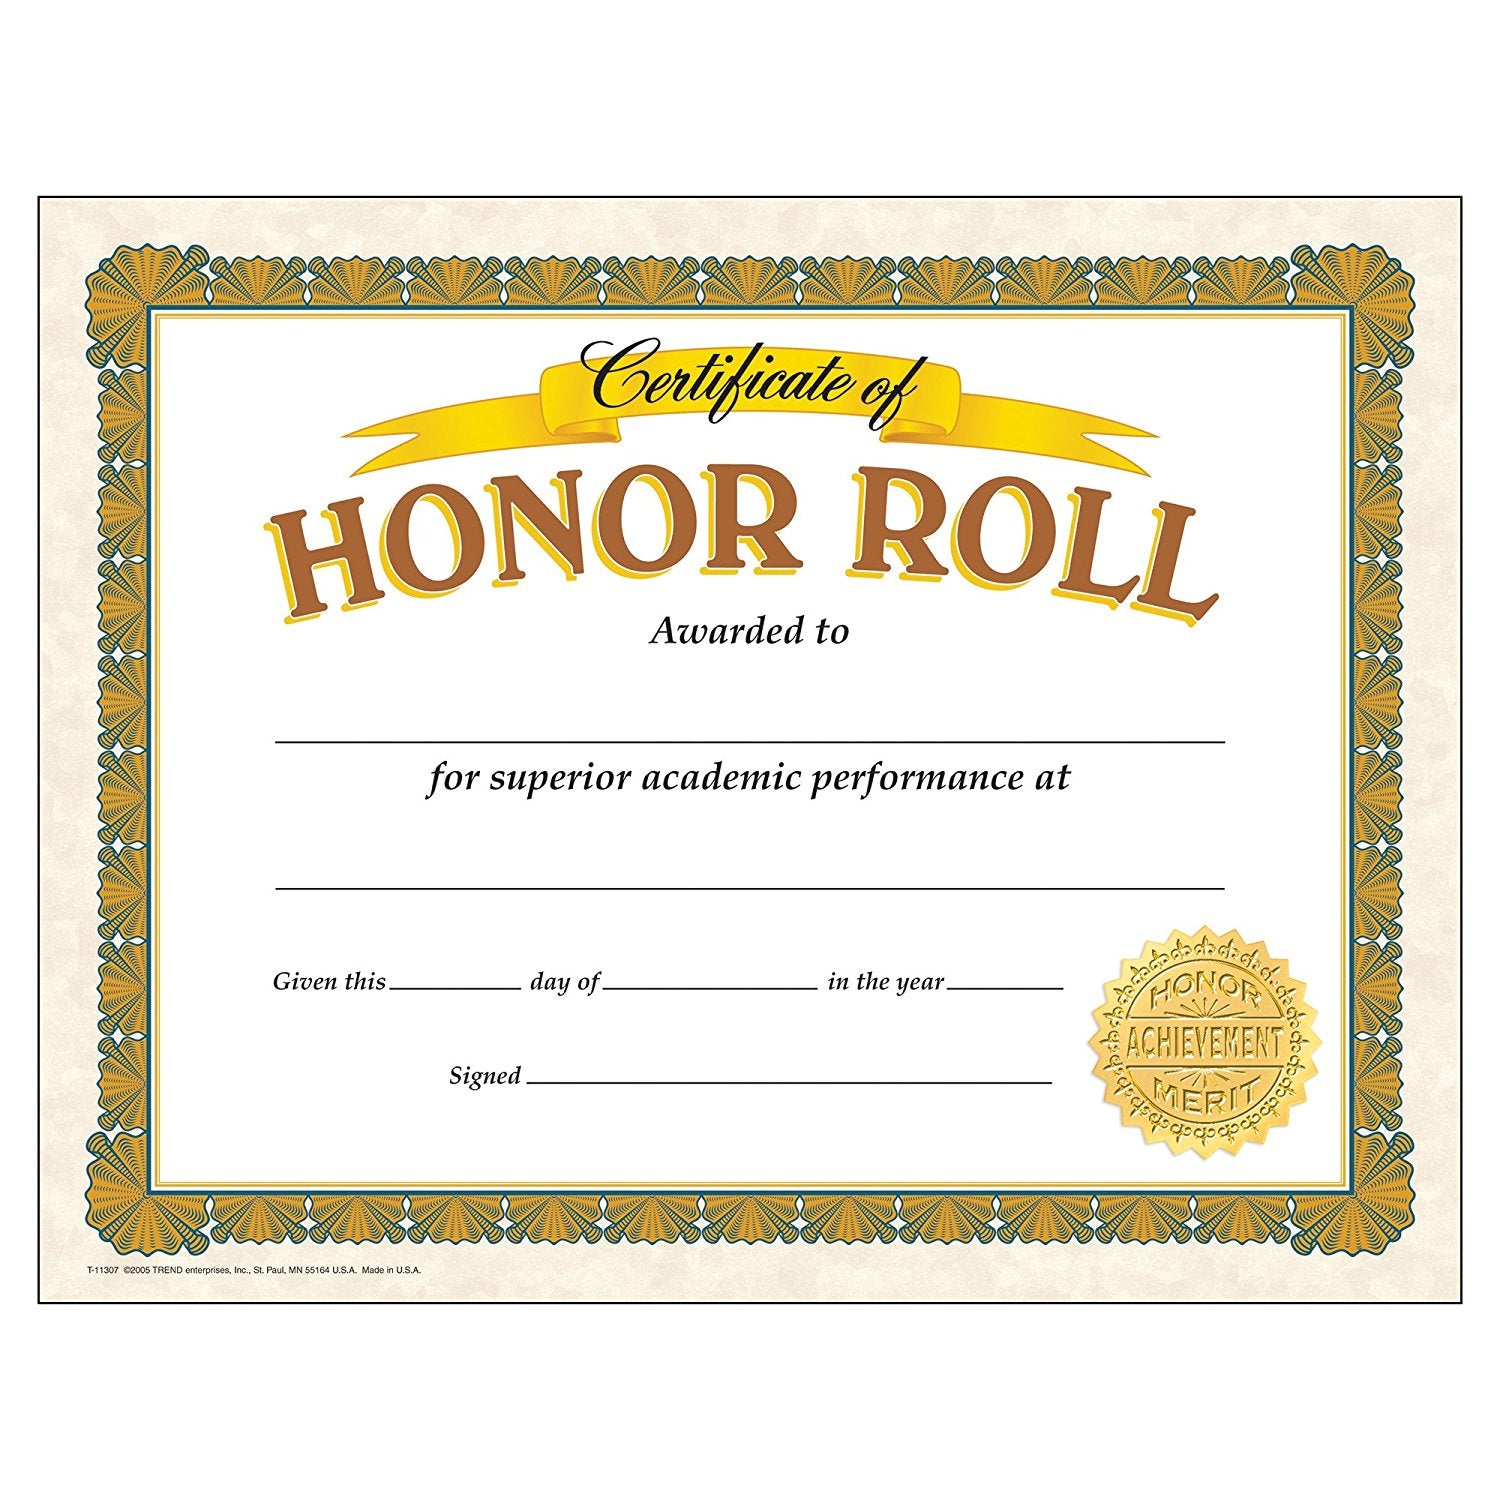 Trend Certificate of Honor Roll, Pack of 30 (T11307)